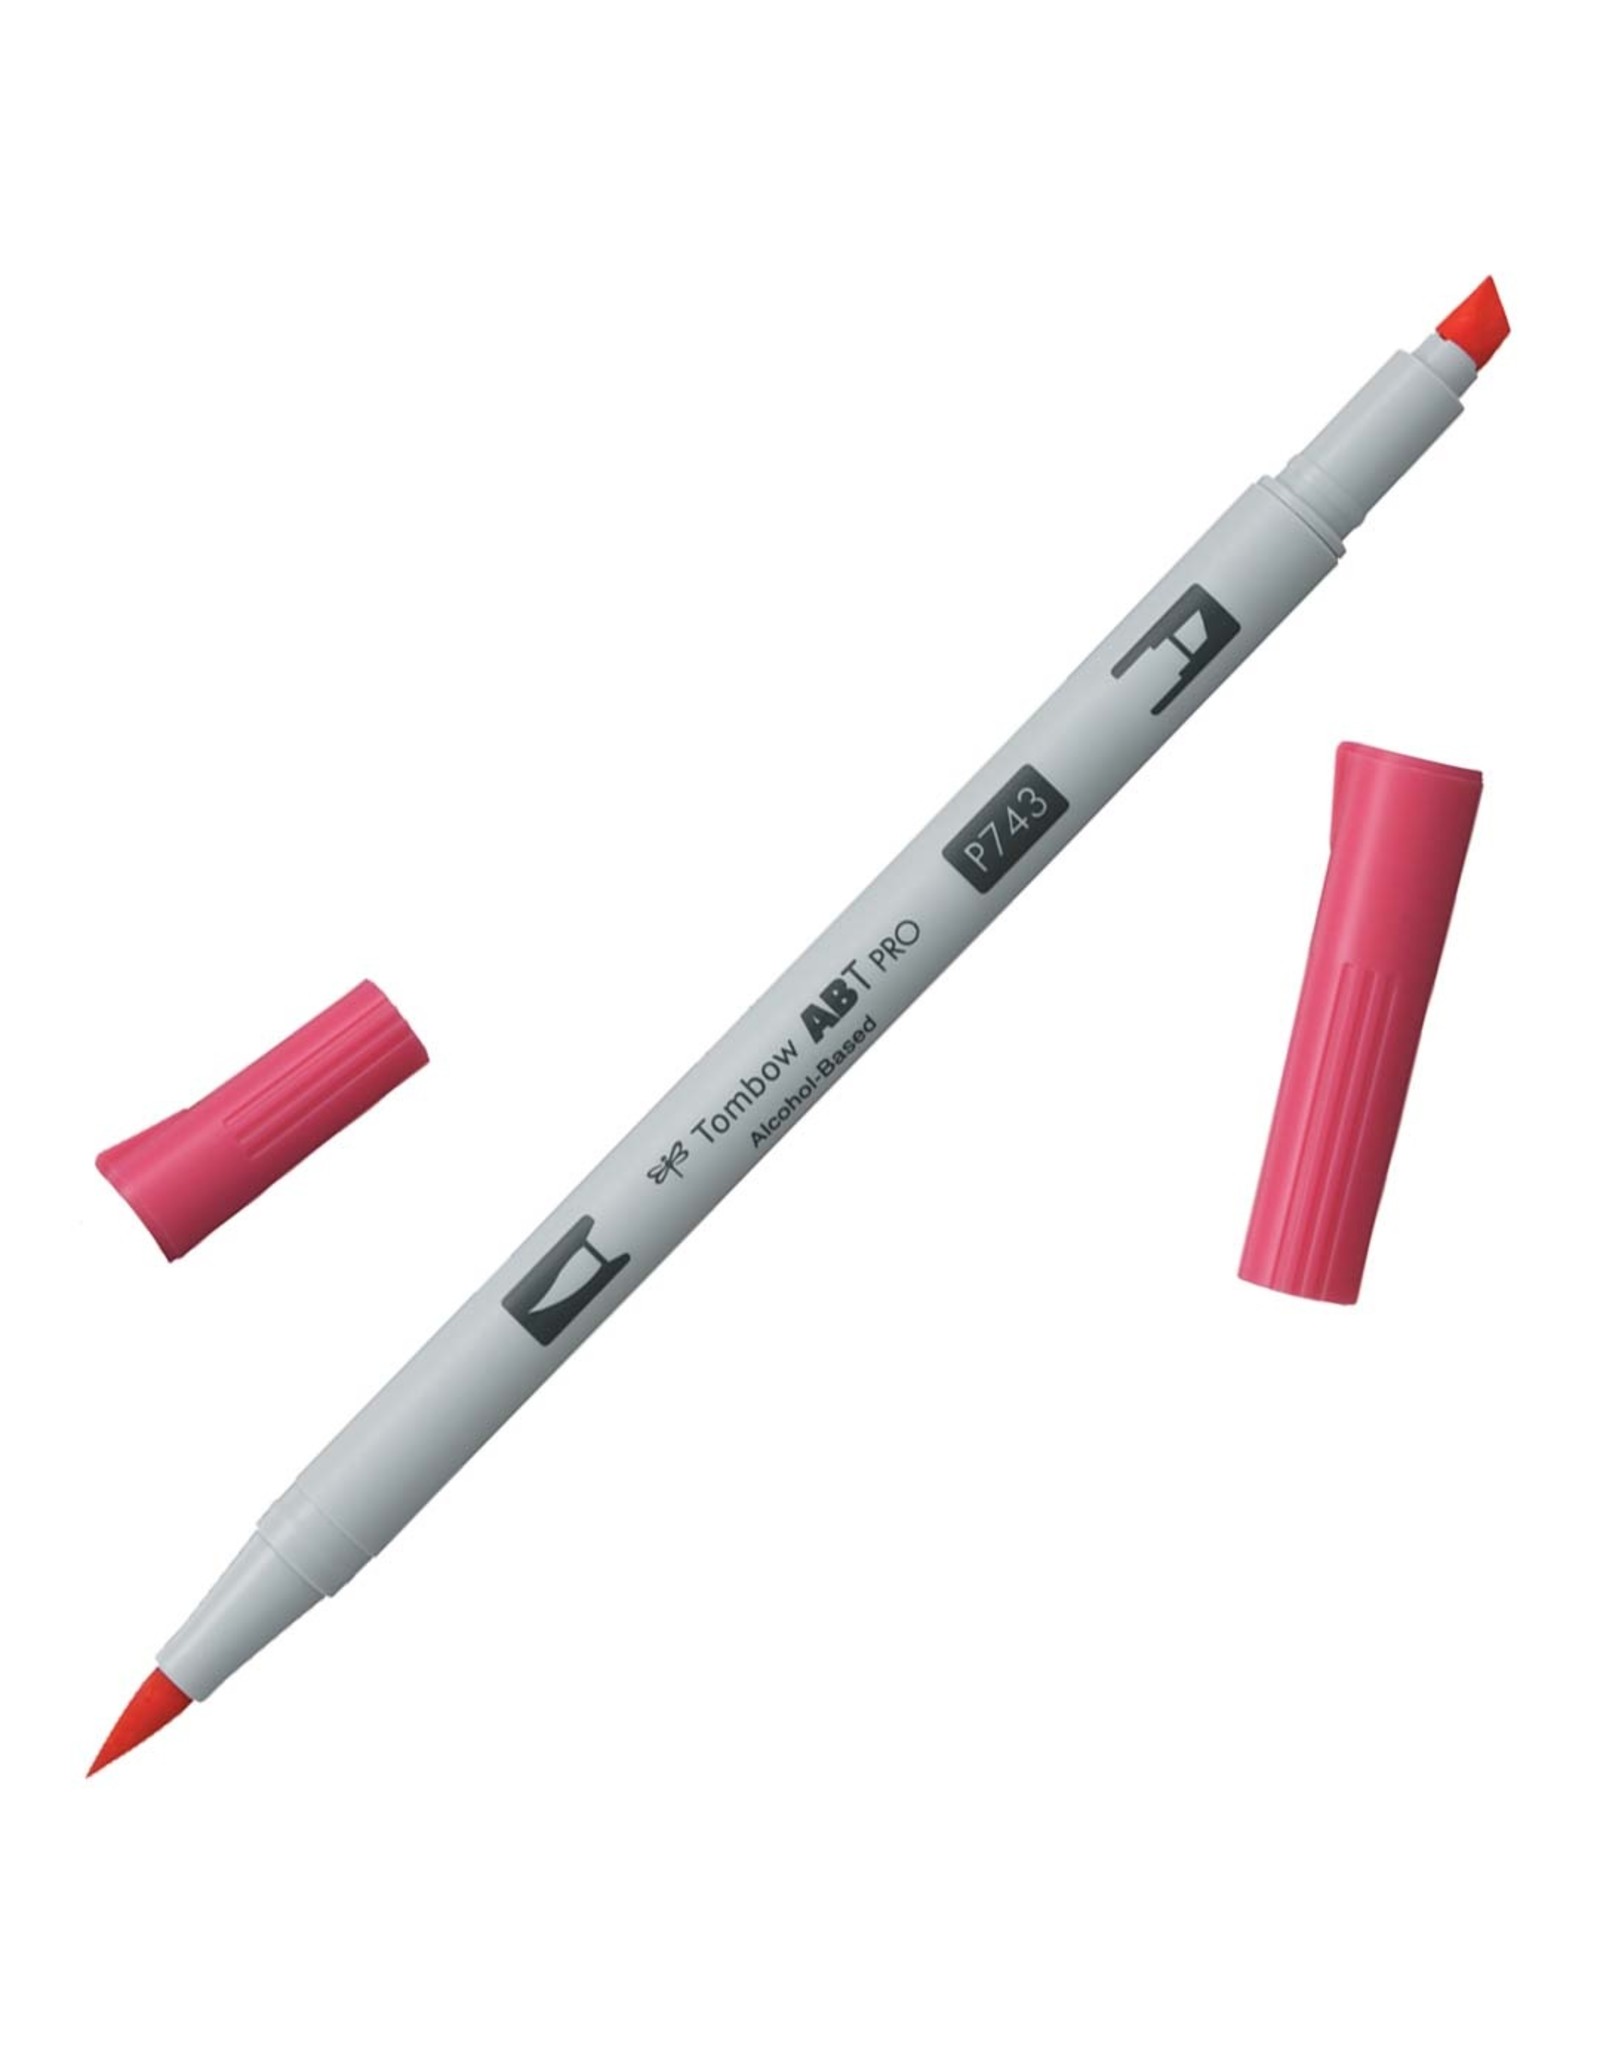 TOMBOW Hot Pink ABT PRO Alcohol-Based Art Marker P743